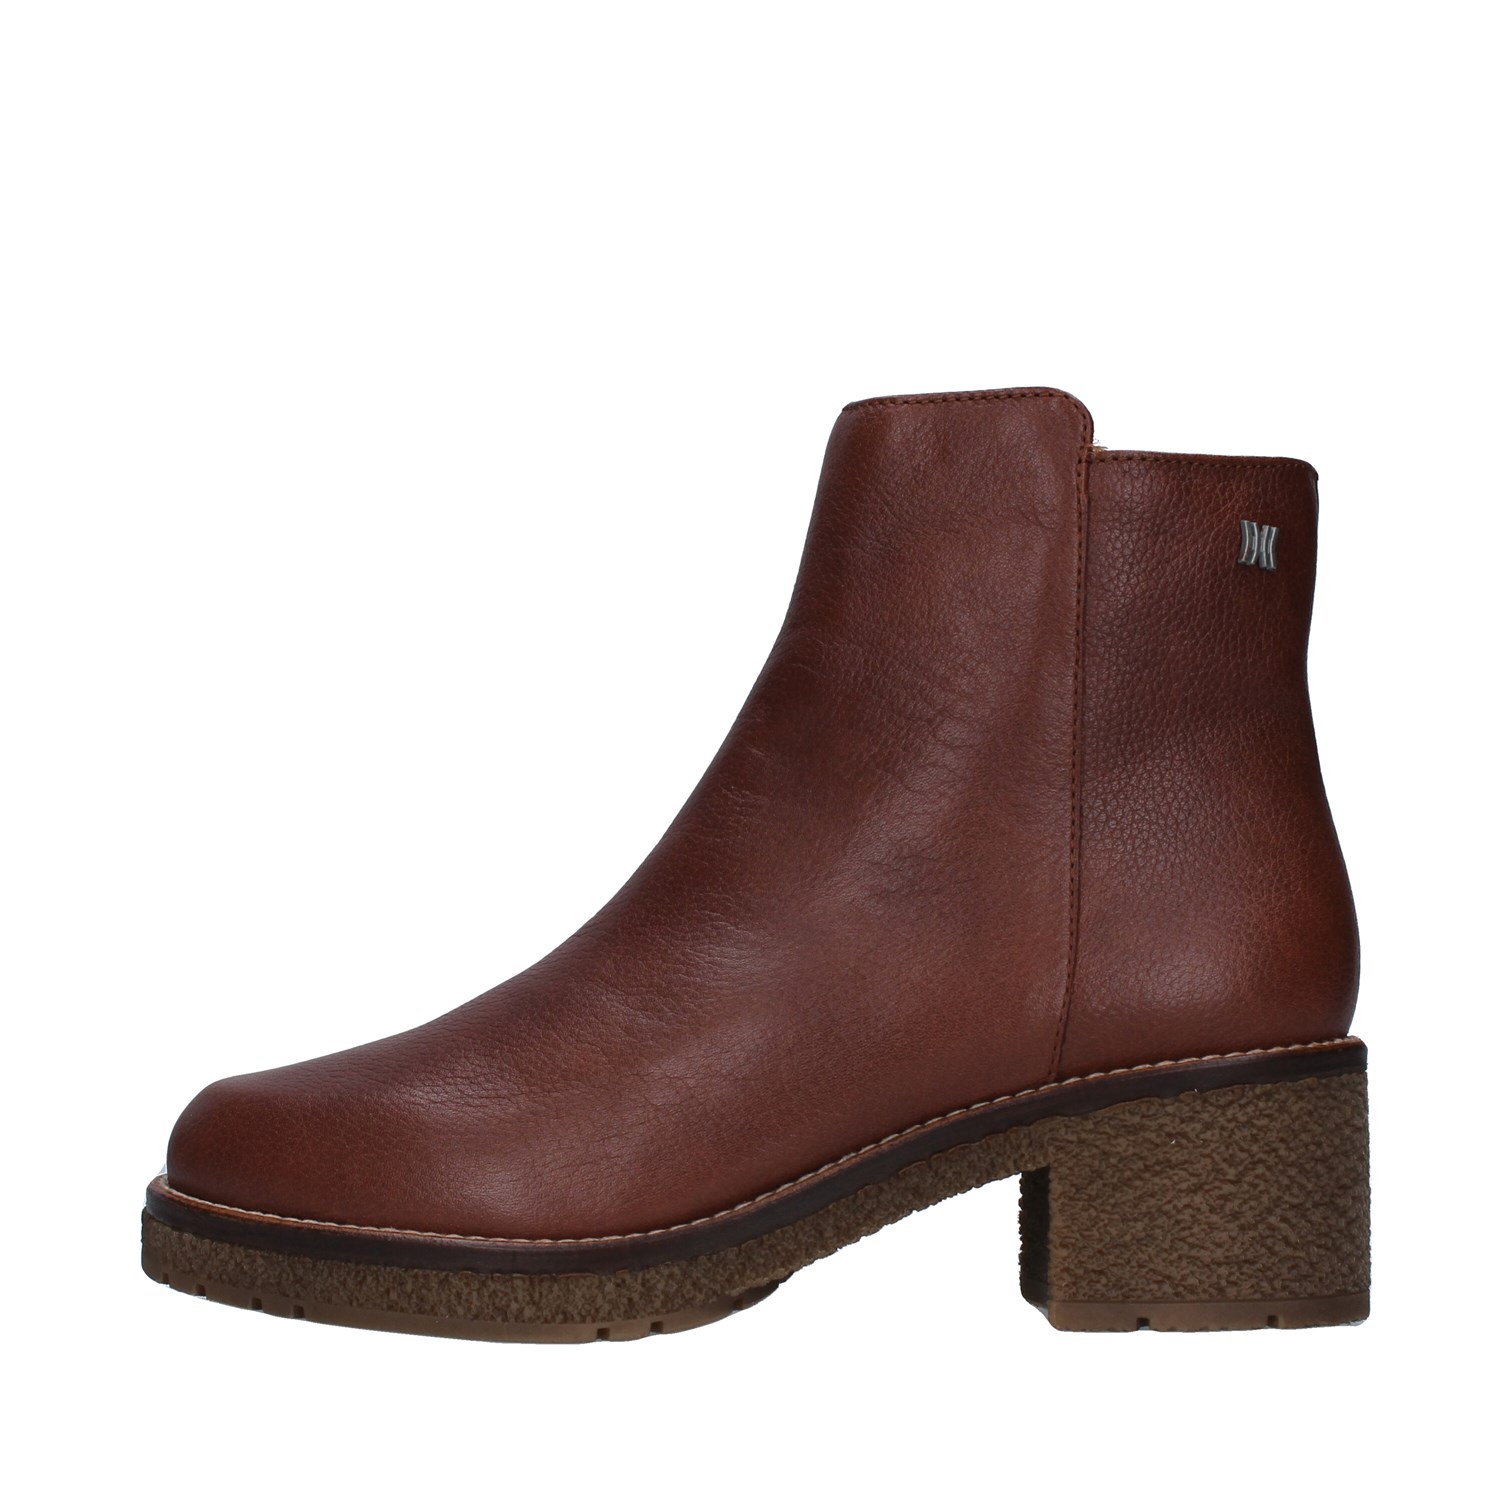 Callaghan Shoes Woman boots BROWN 29502